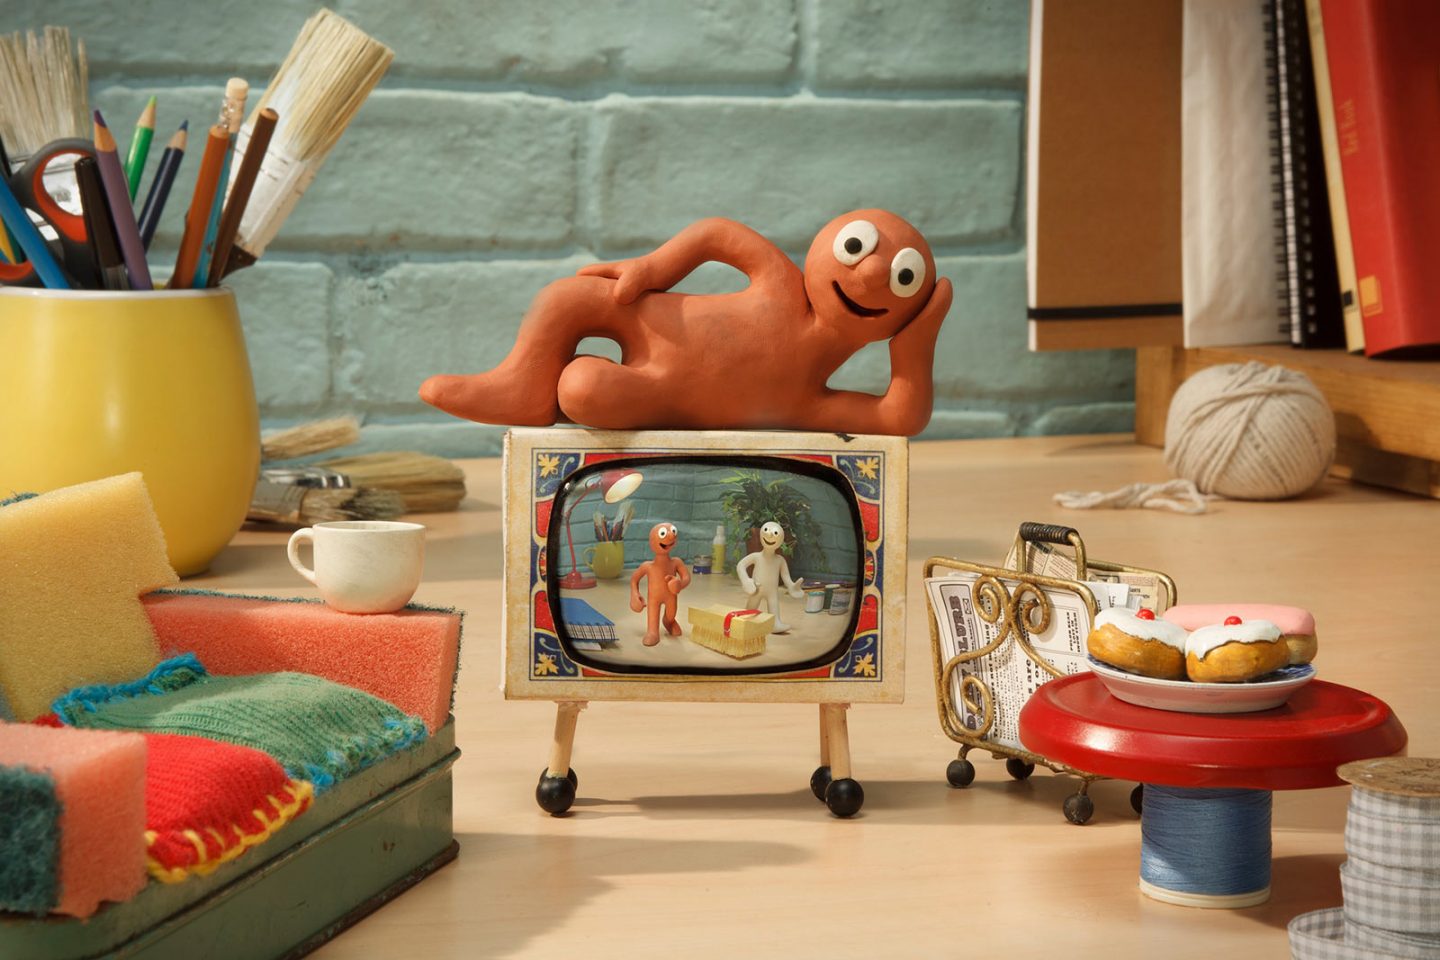 Aardman's classic character Morph was recently revived in a new series of cartoons that aired on CBBC.